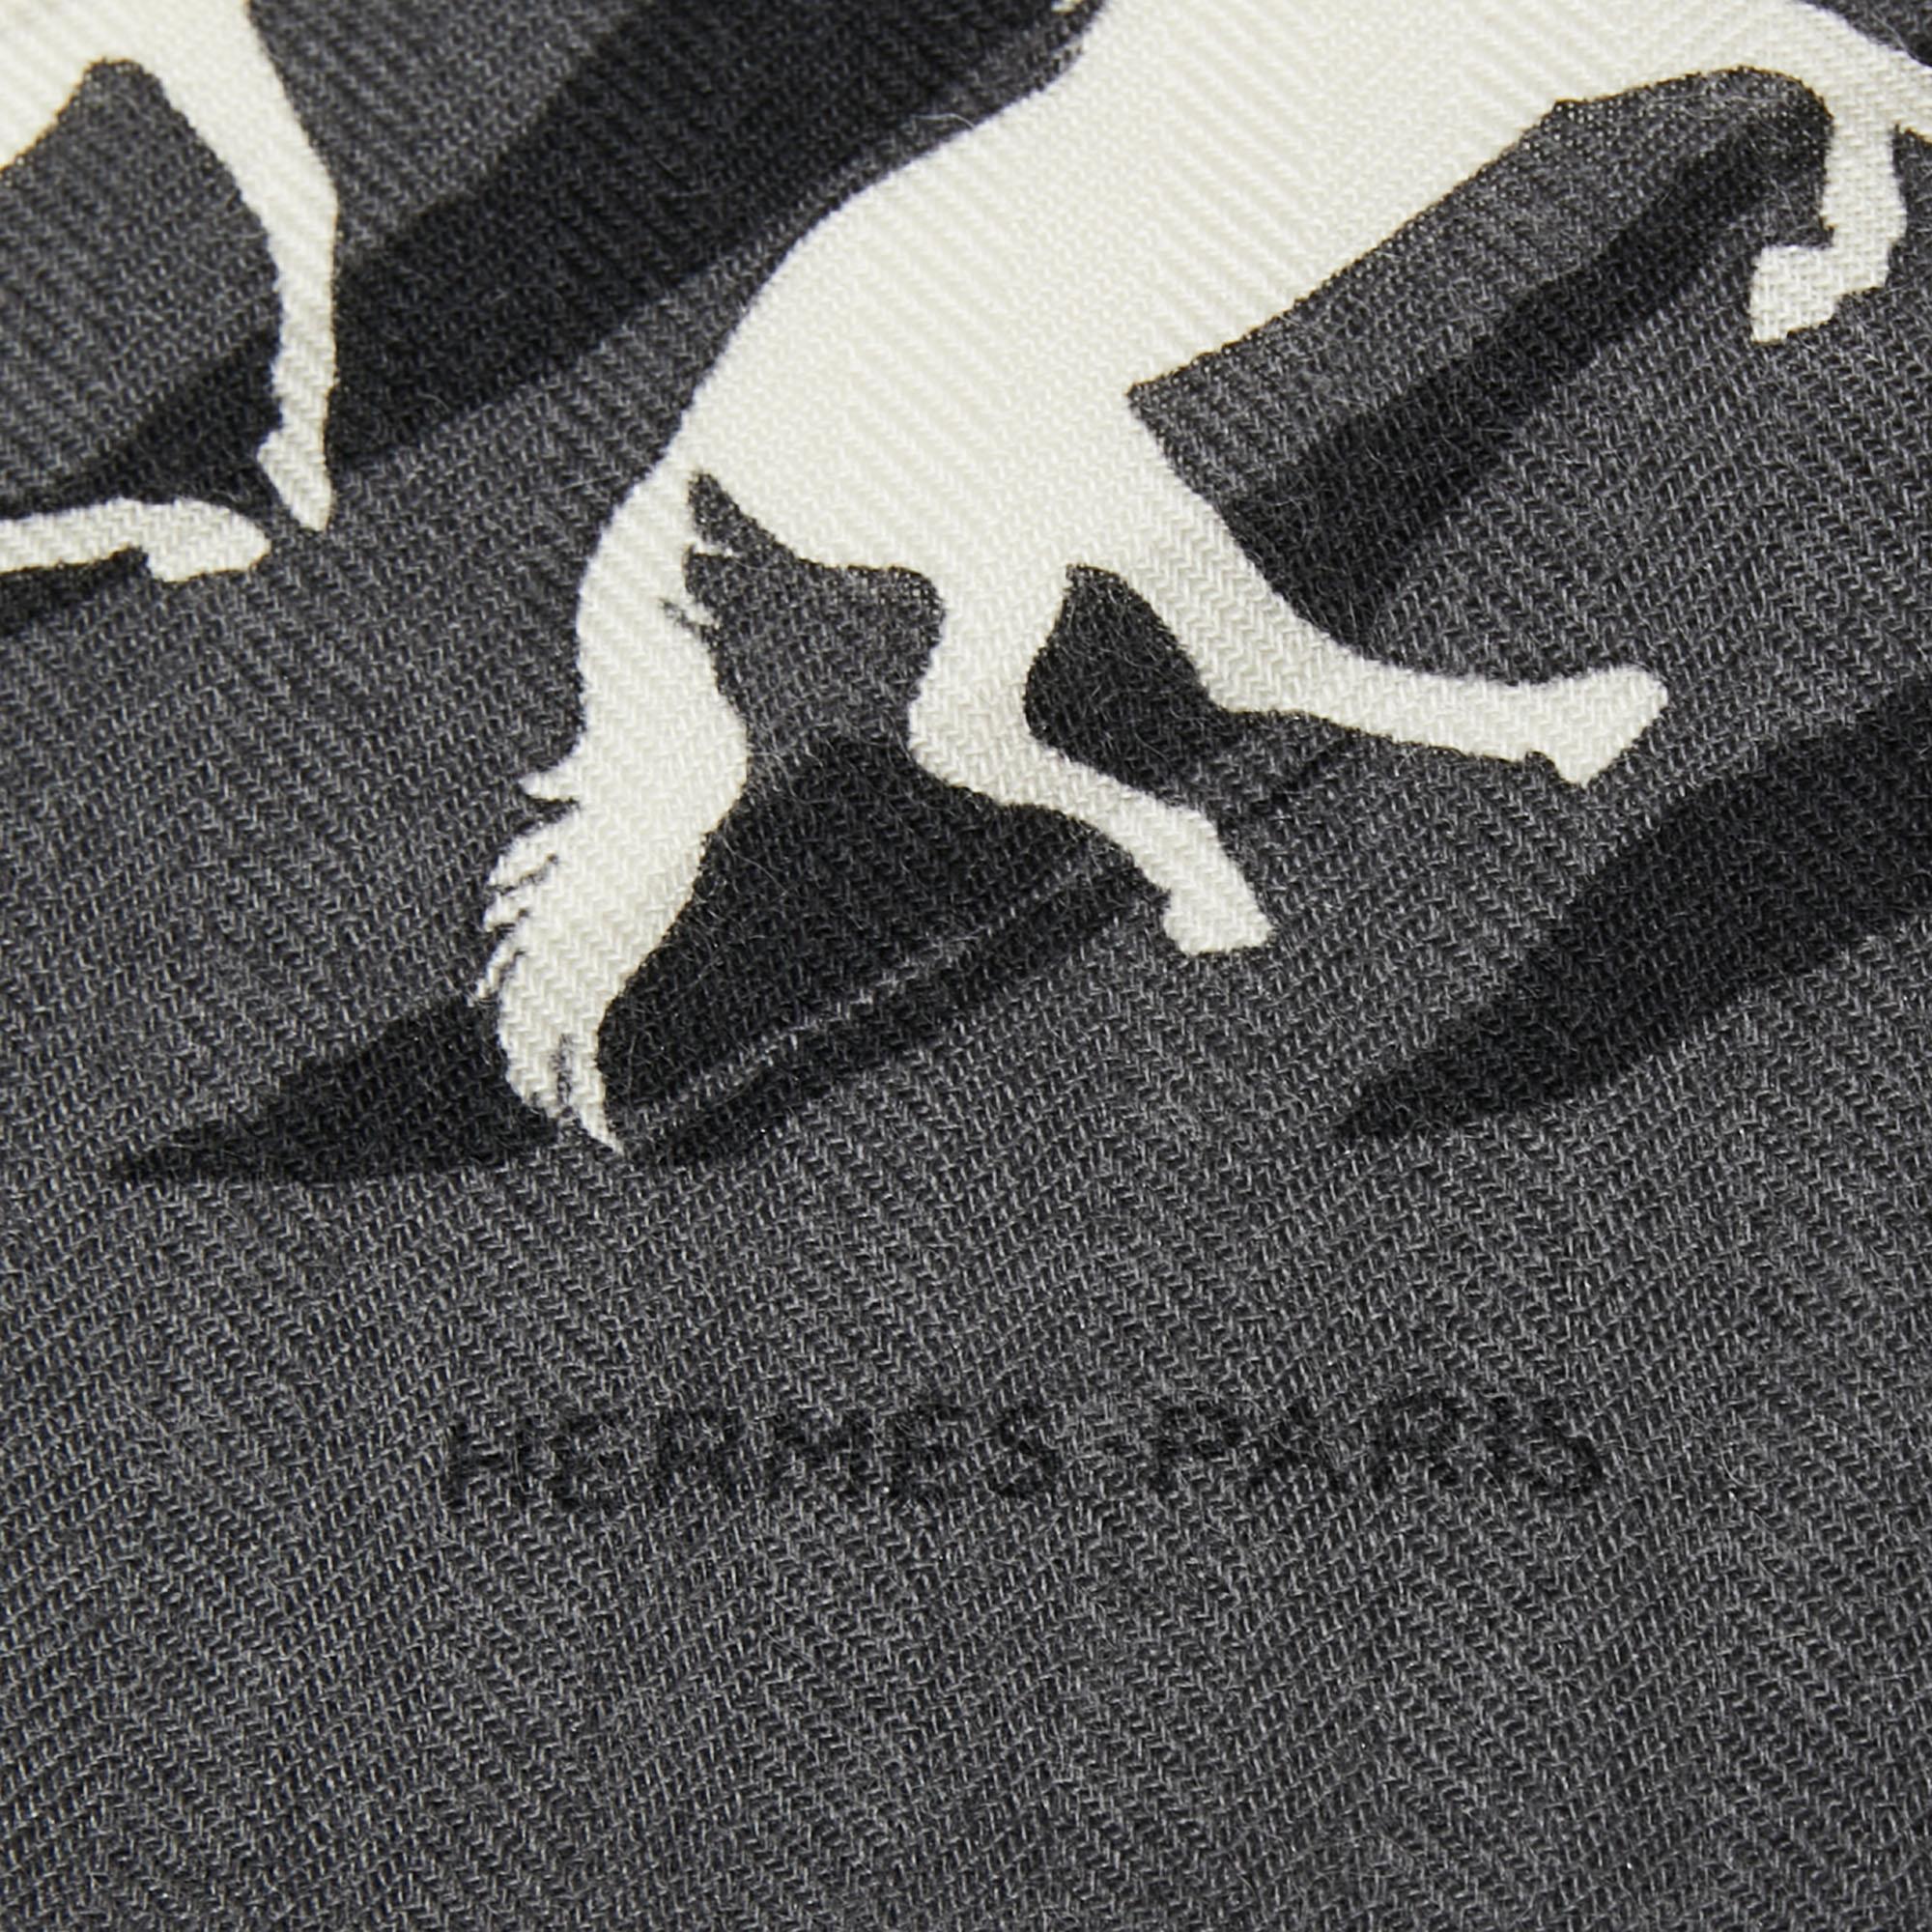 An essential Hermès accessory, the label's scarves are as iconic as any other creation from the brand and are collector's favorites. This rendition is carefully cut from luxurious cashmere and designed with the Horse print, showcasing the label's